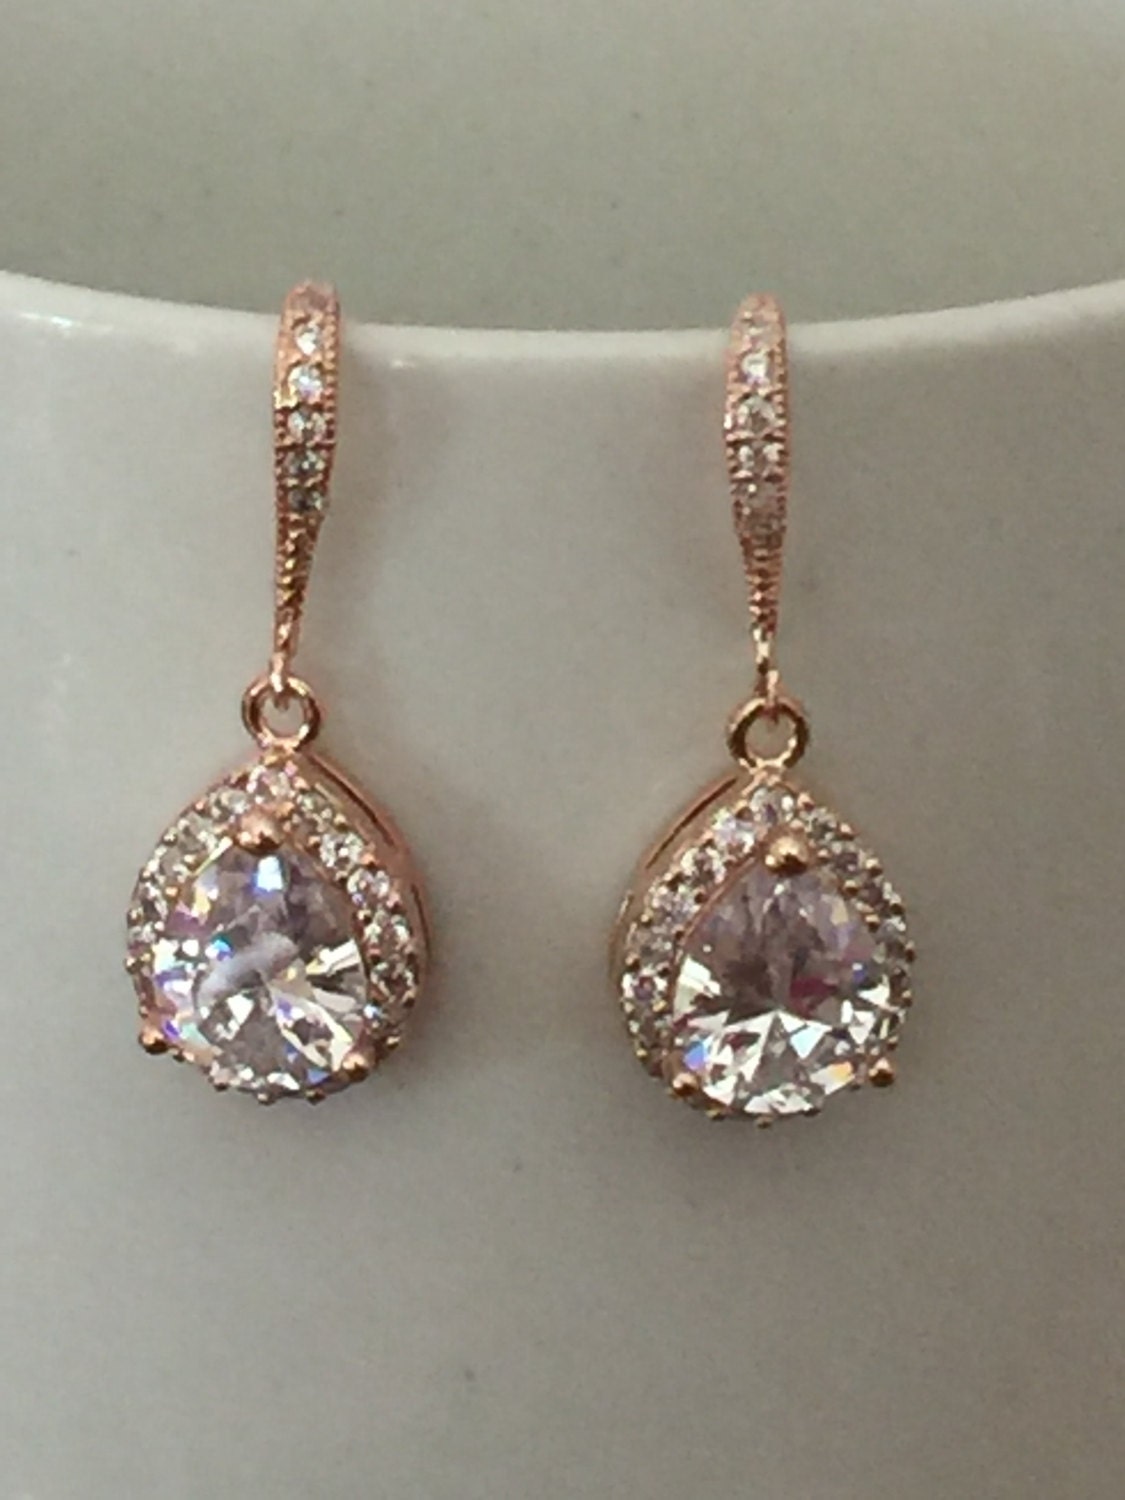 Rose gold, gold or silver  dangle rhinestone earrings, bridal jewelry, bridesmaid gift, crystal earrings, rose gold earrings